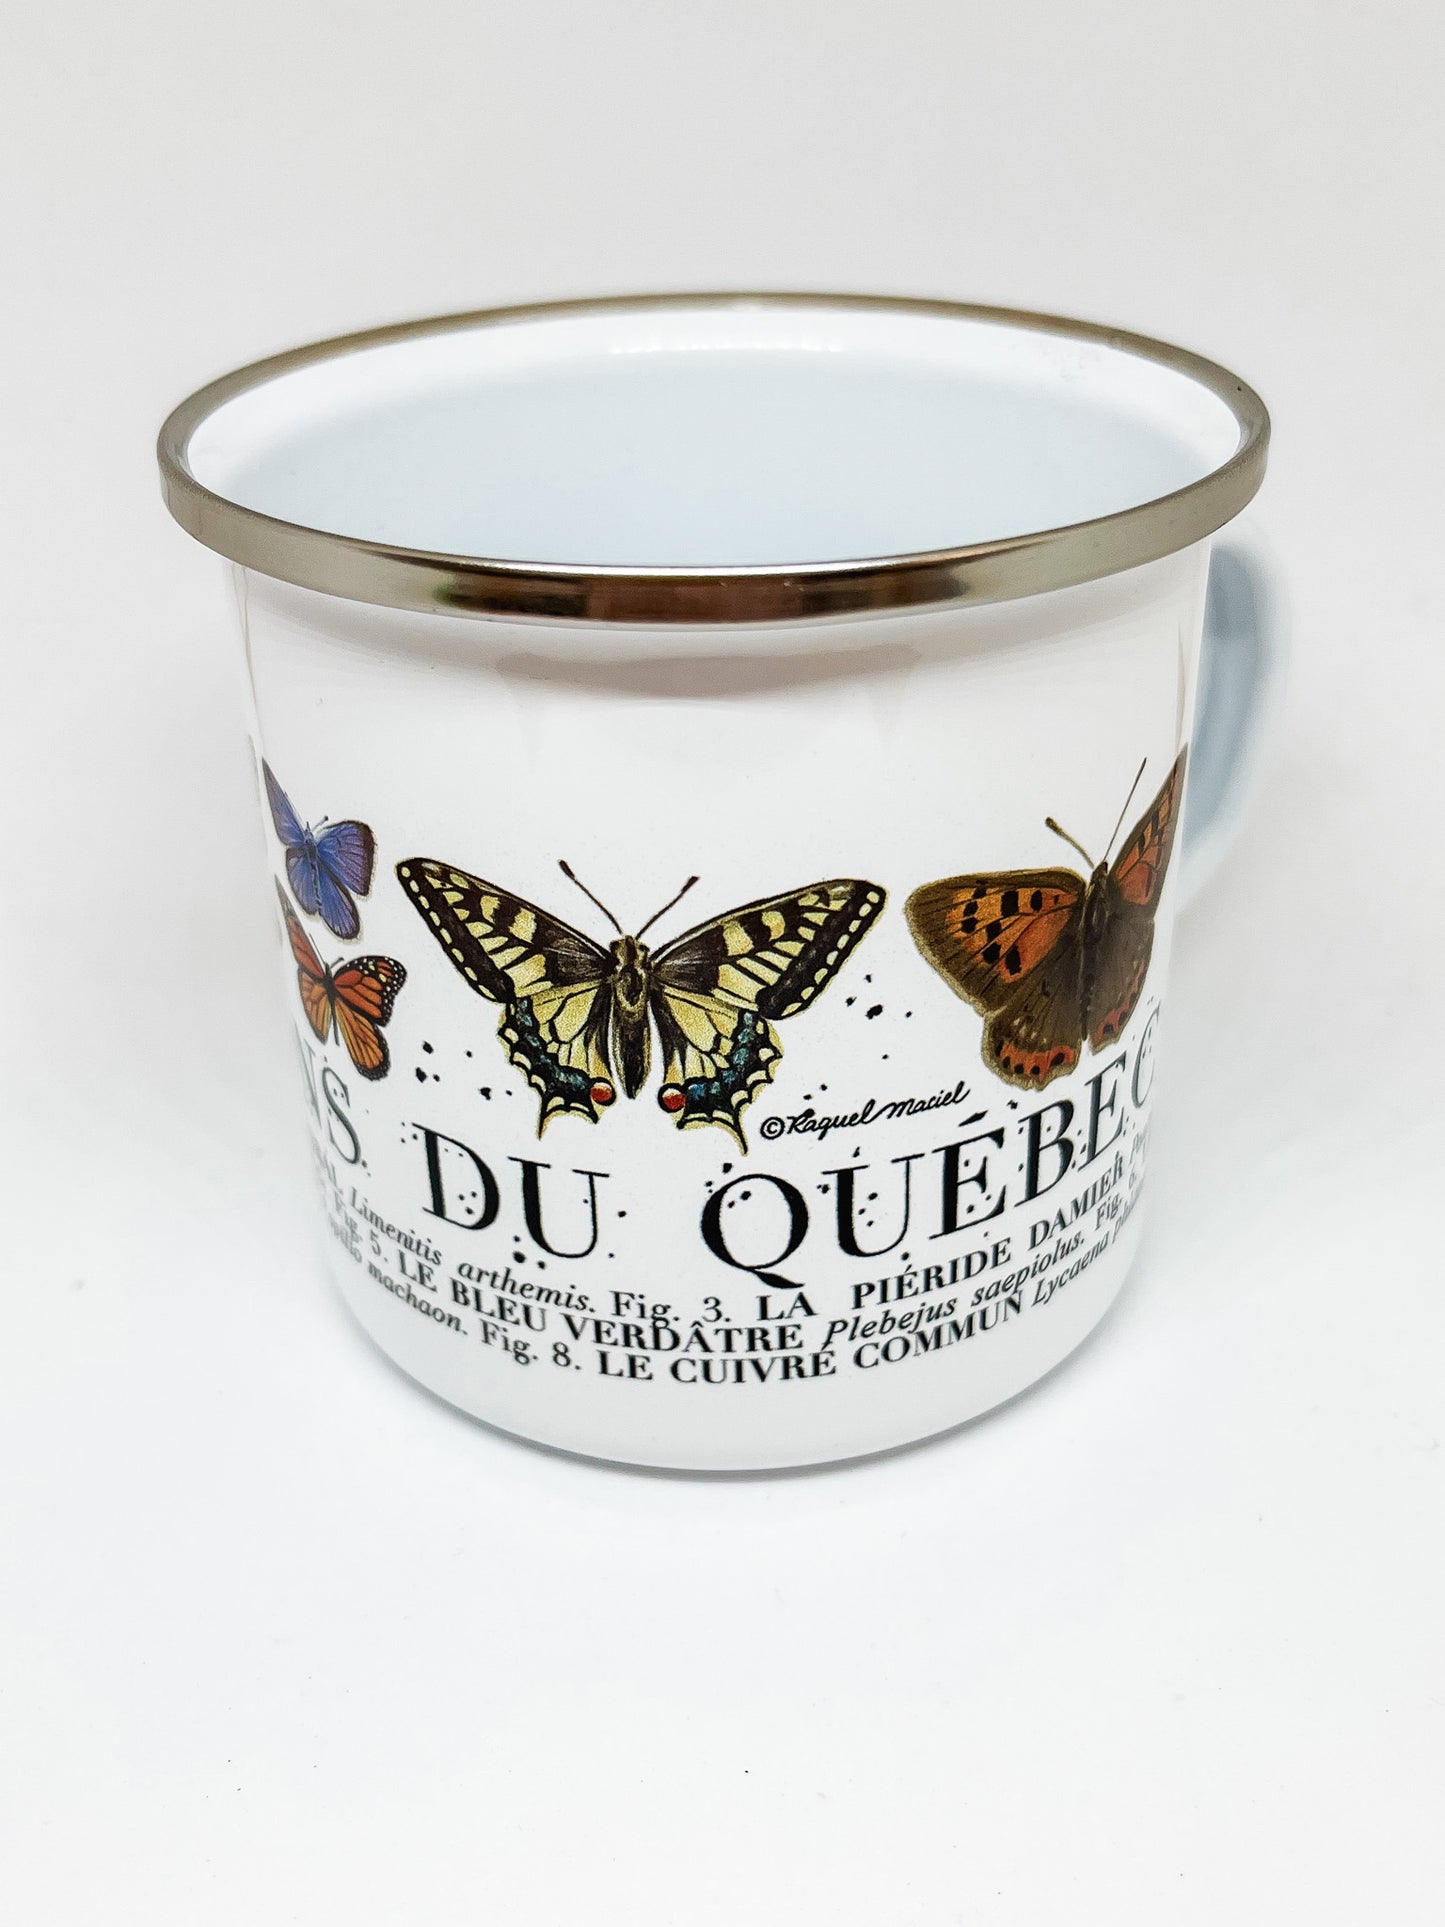 White enamel mug with silver rim and illustrations of butterflies with text below identifying each butterfly